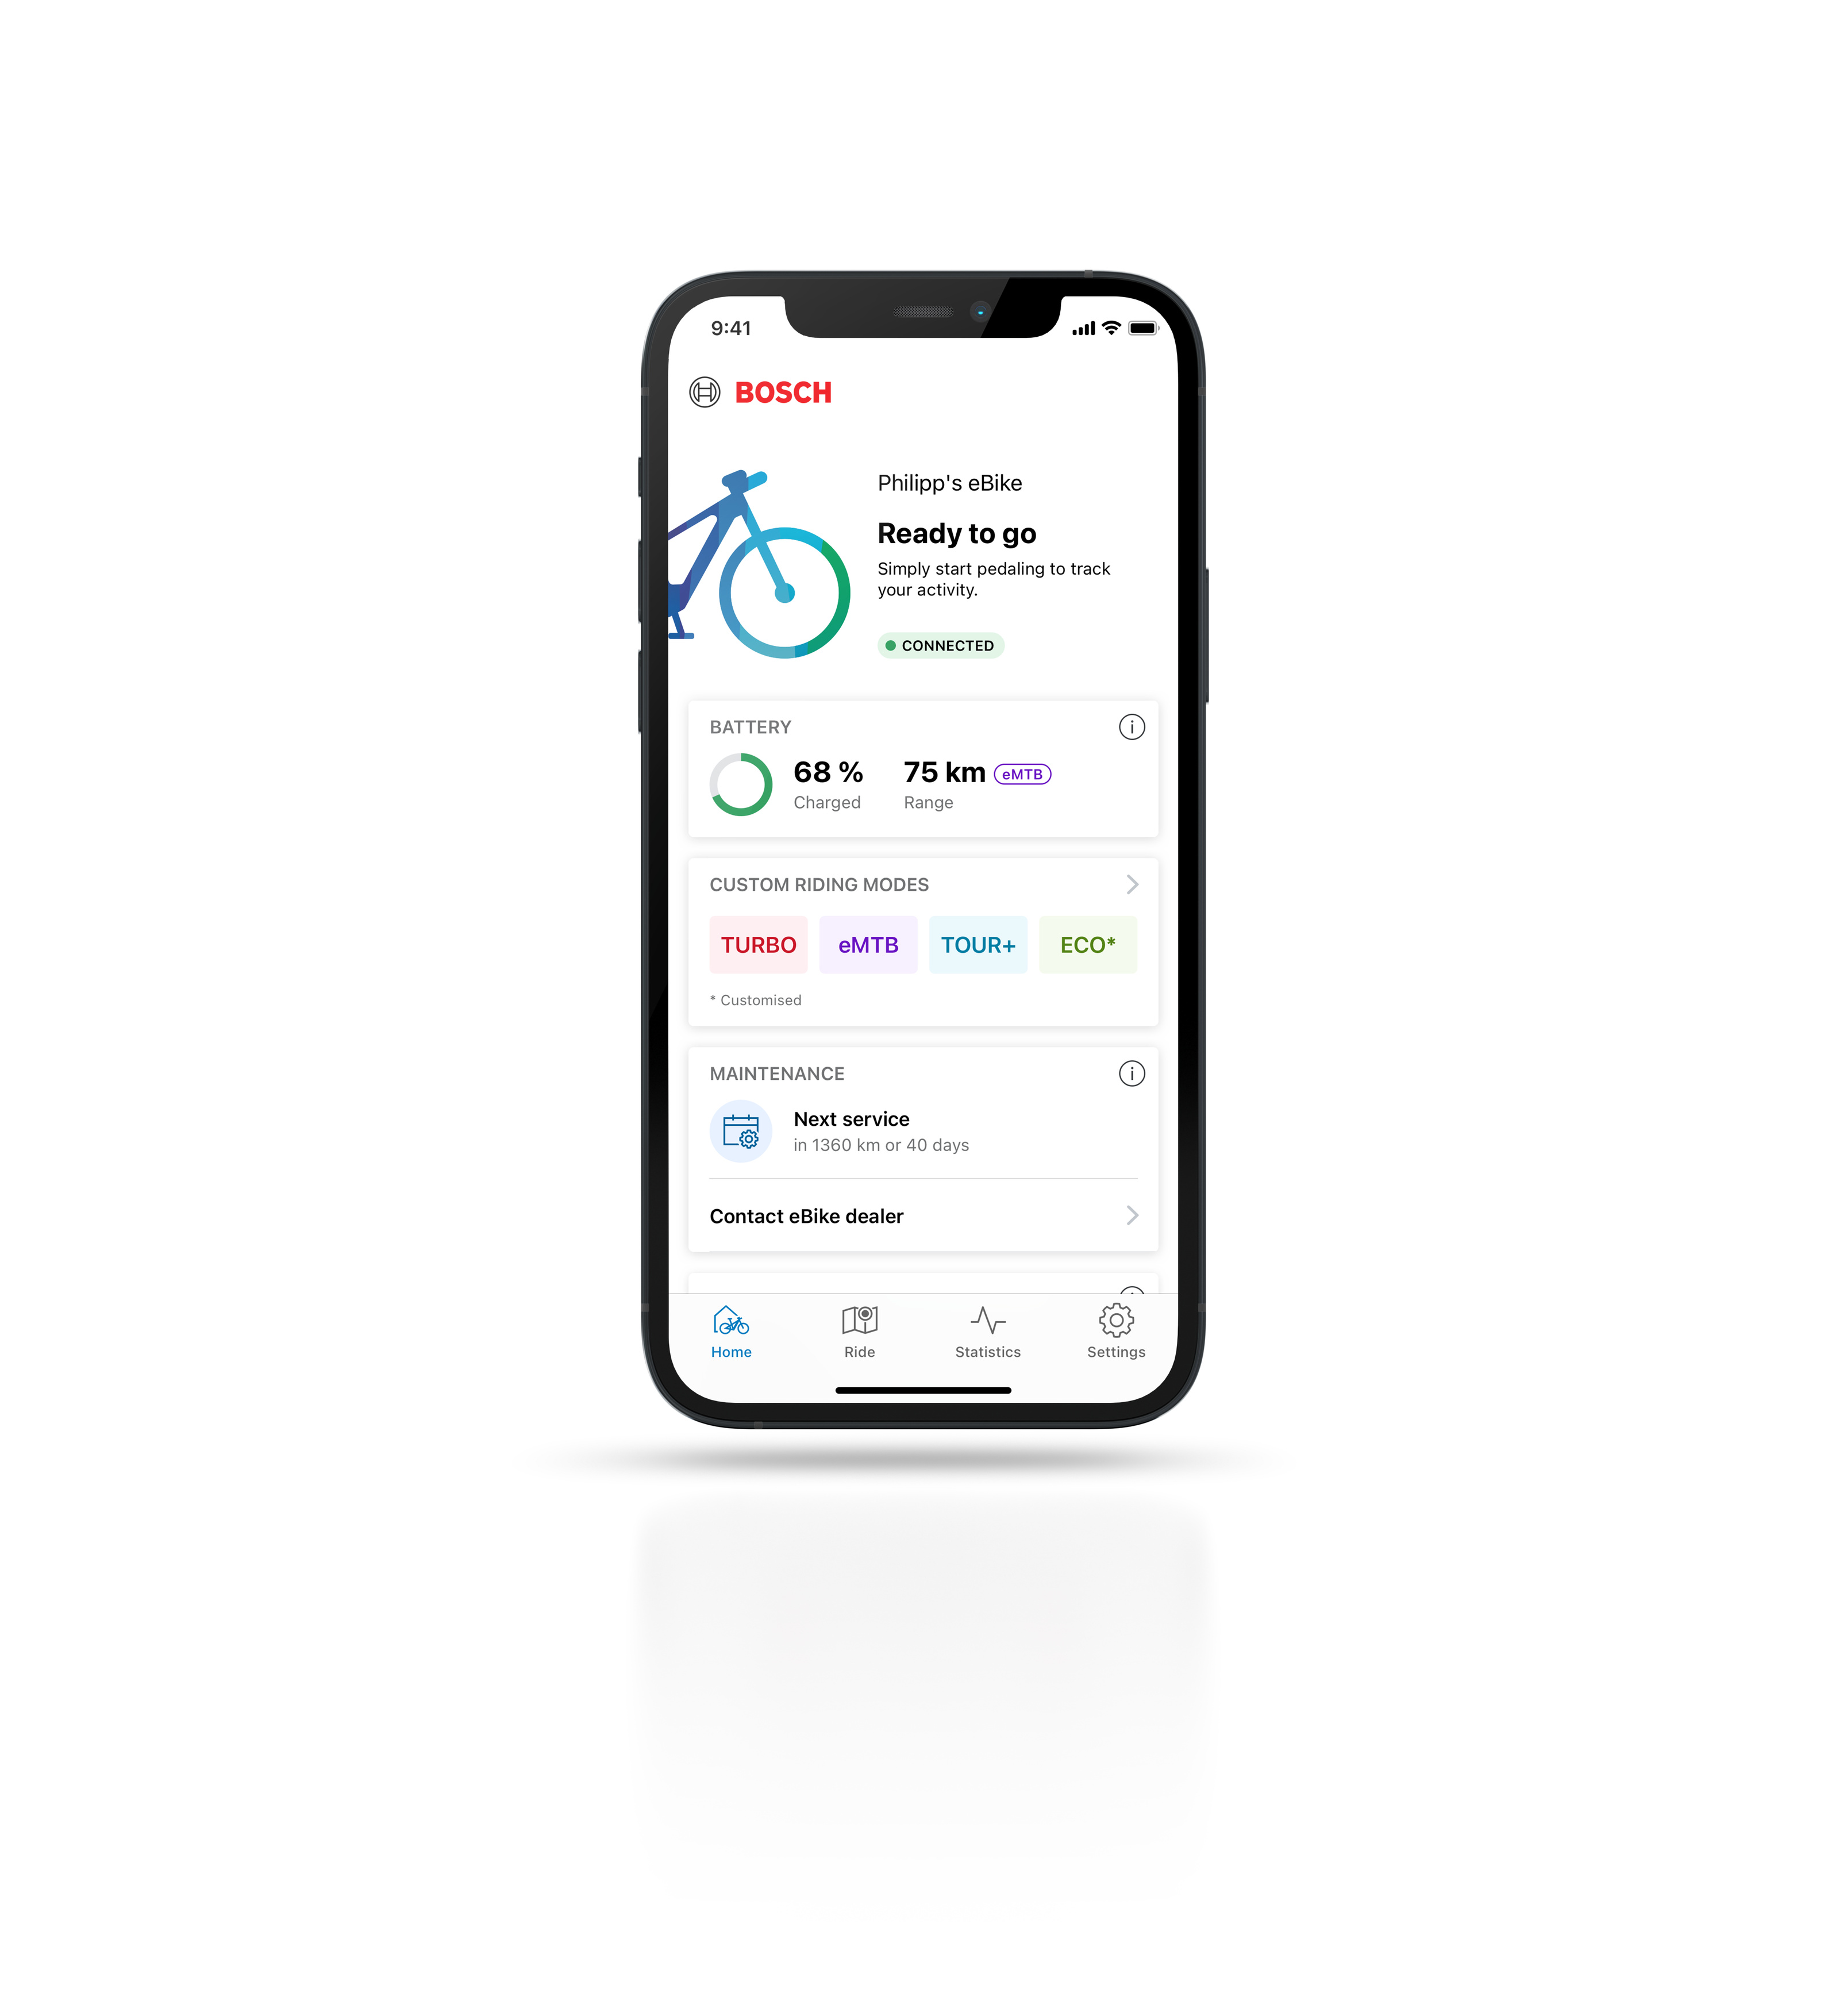 eBike Flow app as offered by Bosch or customised